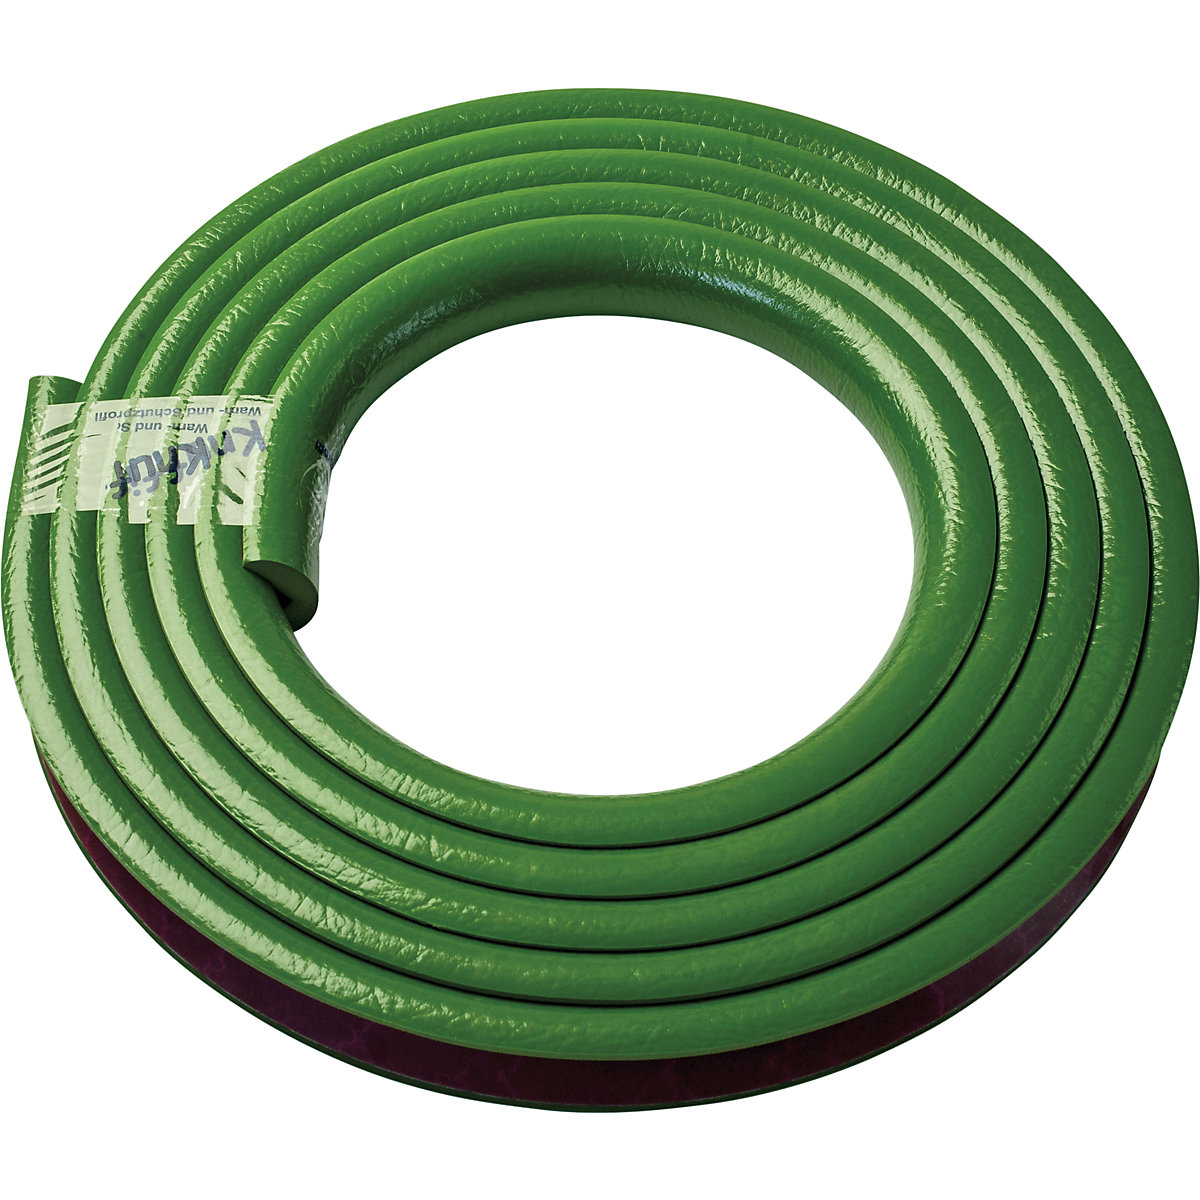 Knuffi® corner protection – SHG, type A, 1 x 5 m roll, green-19